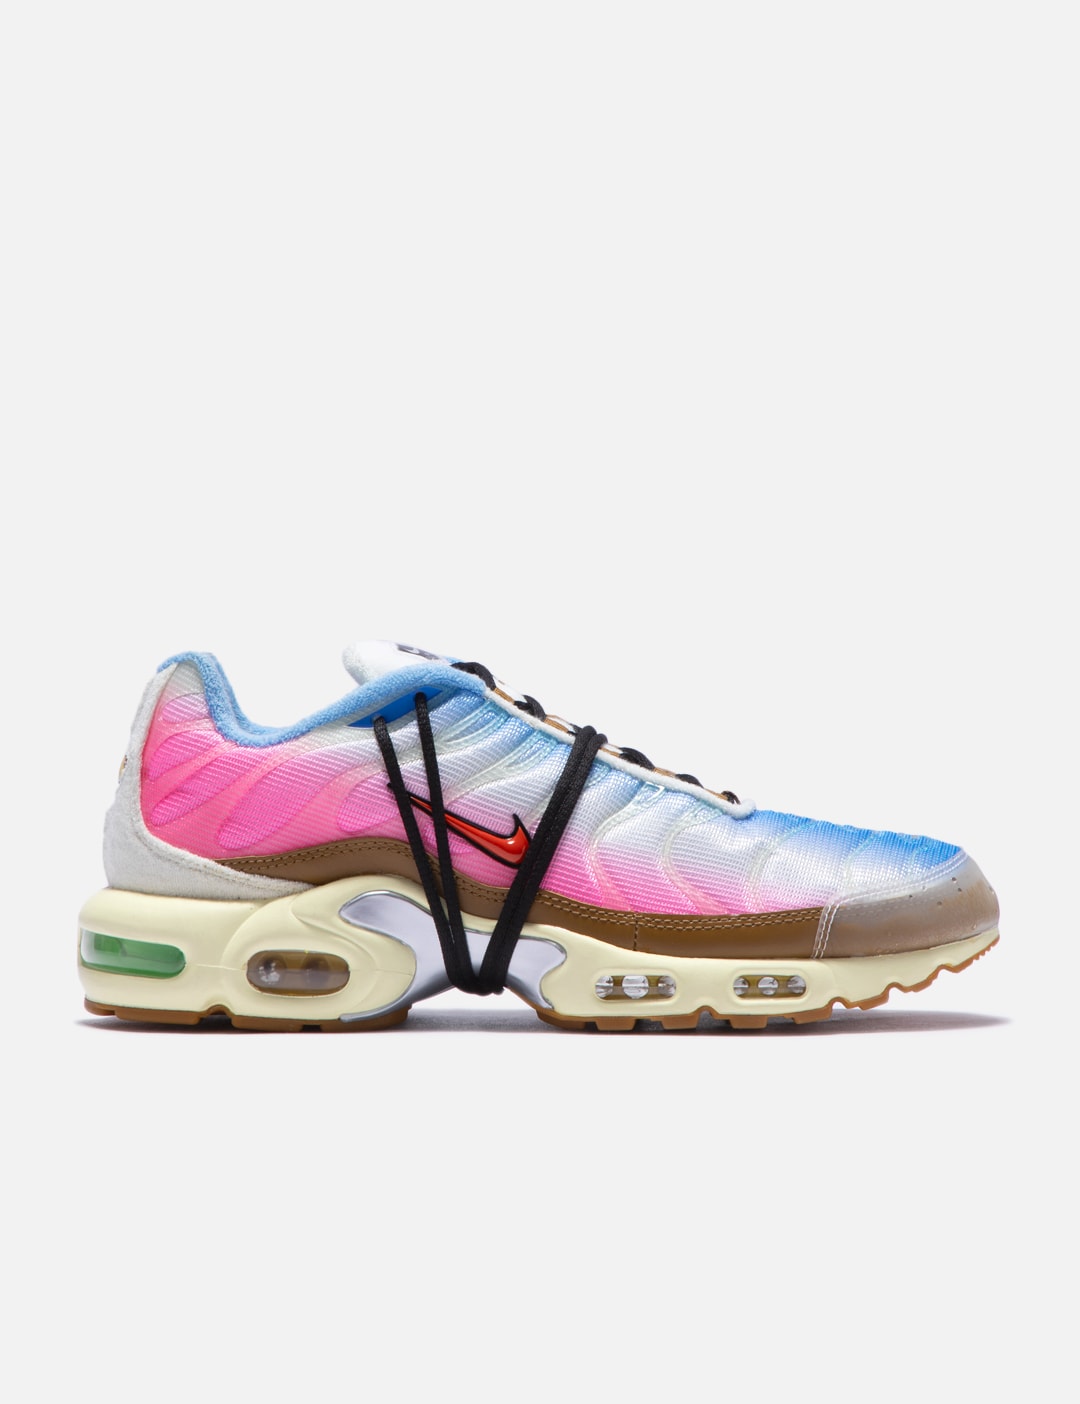 Nike - Nike Air Max Plus | HBX - Globally Curated and Lifestyle by Hypebeast